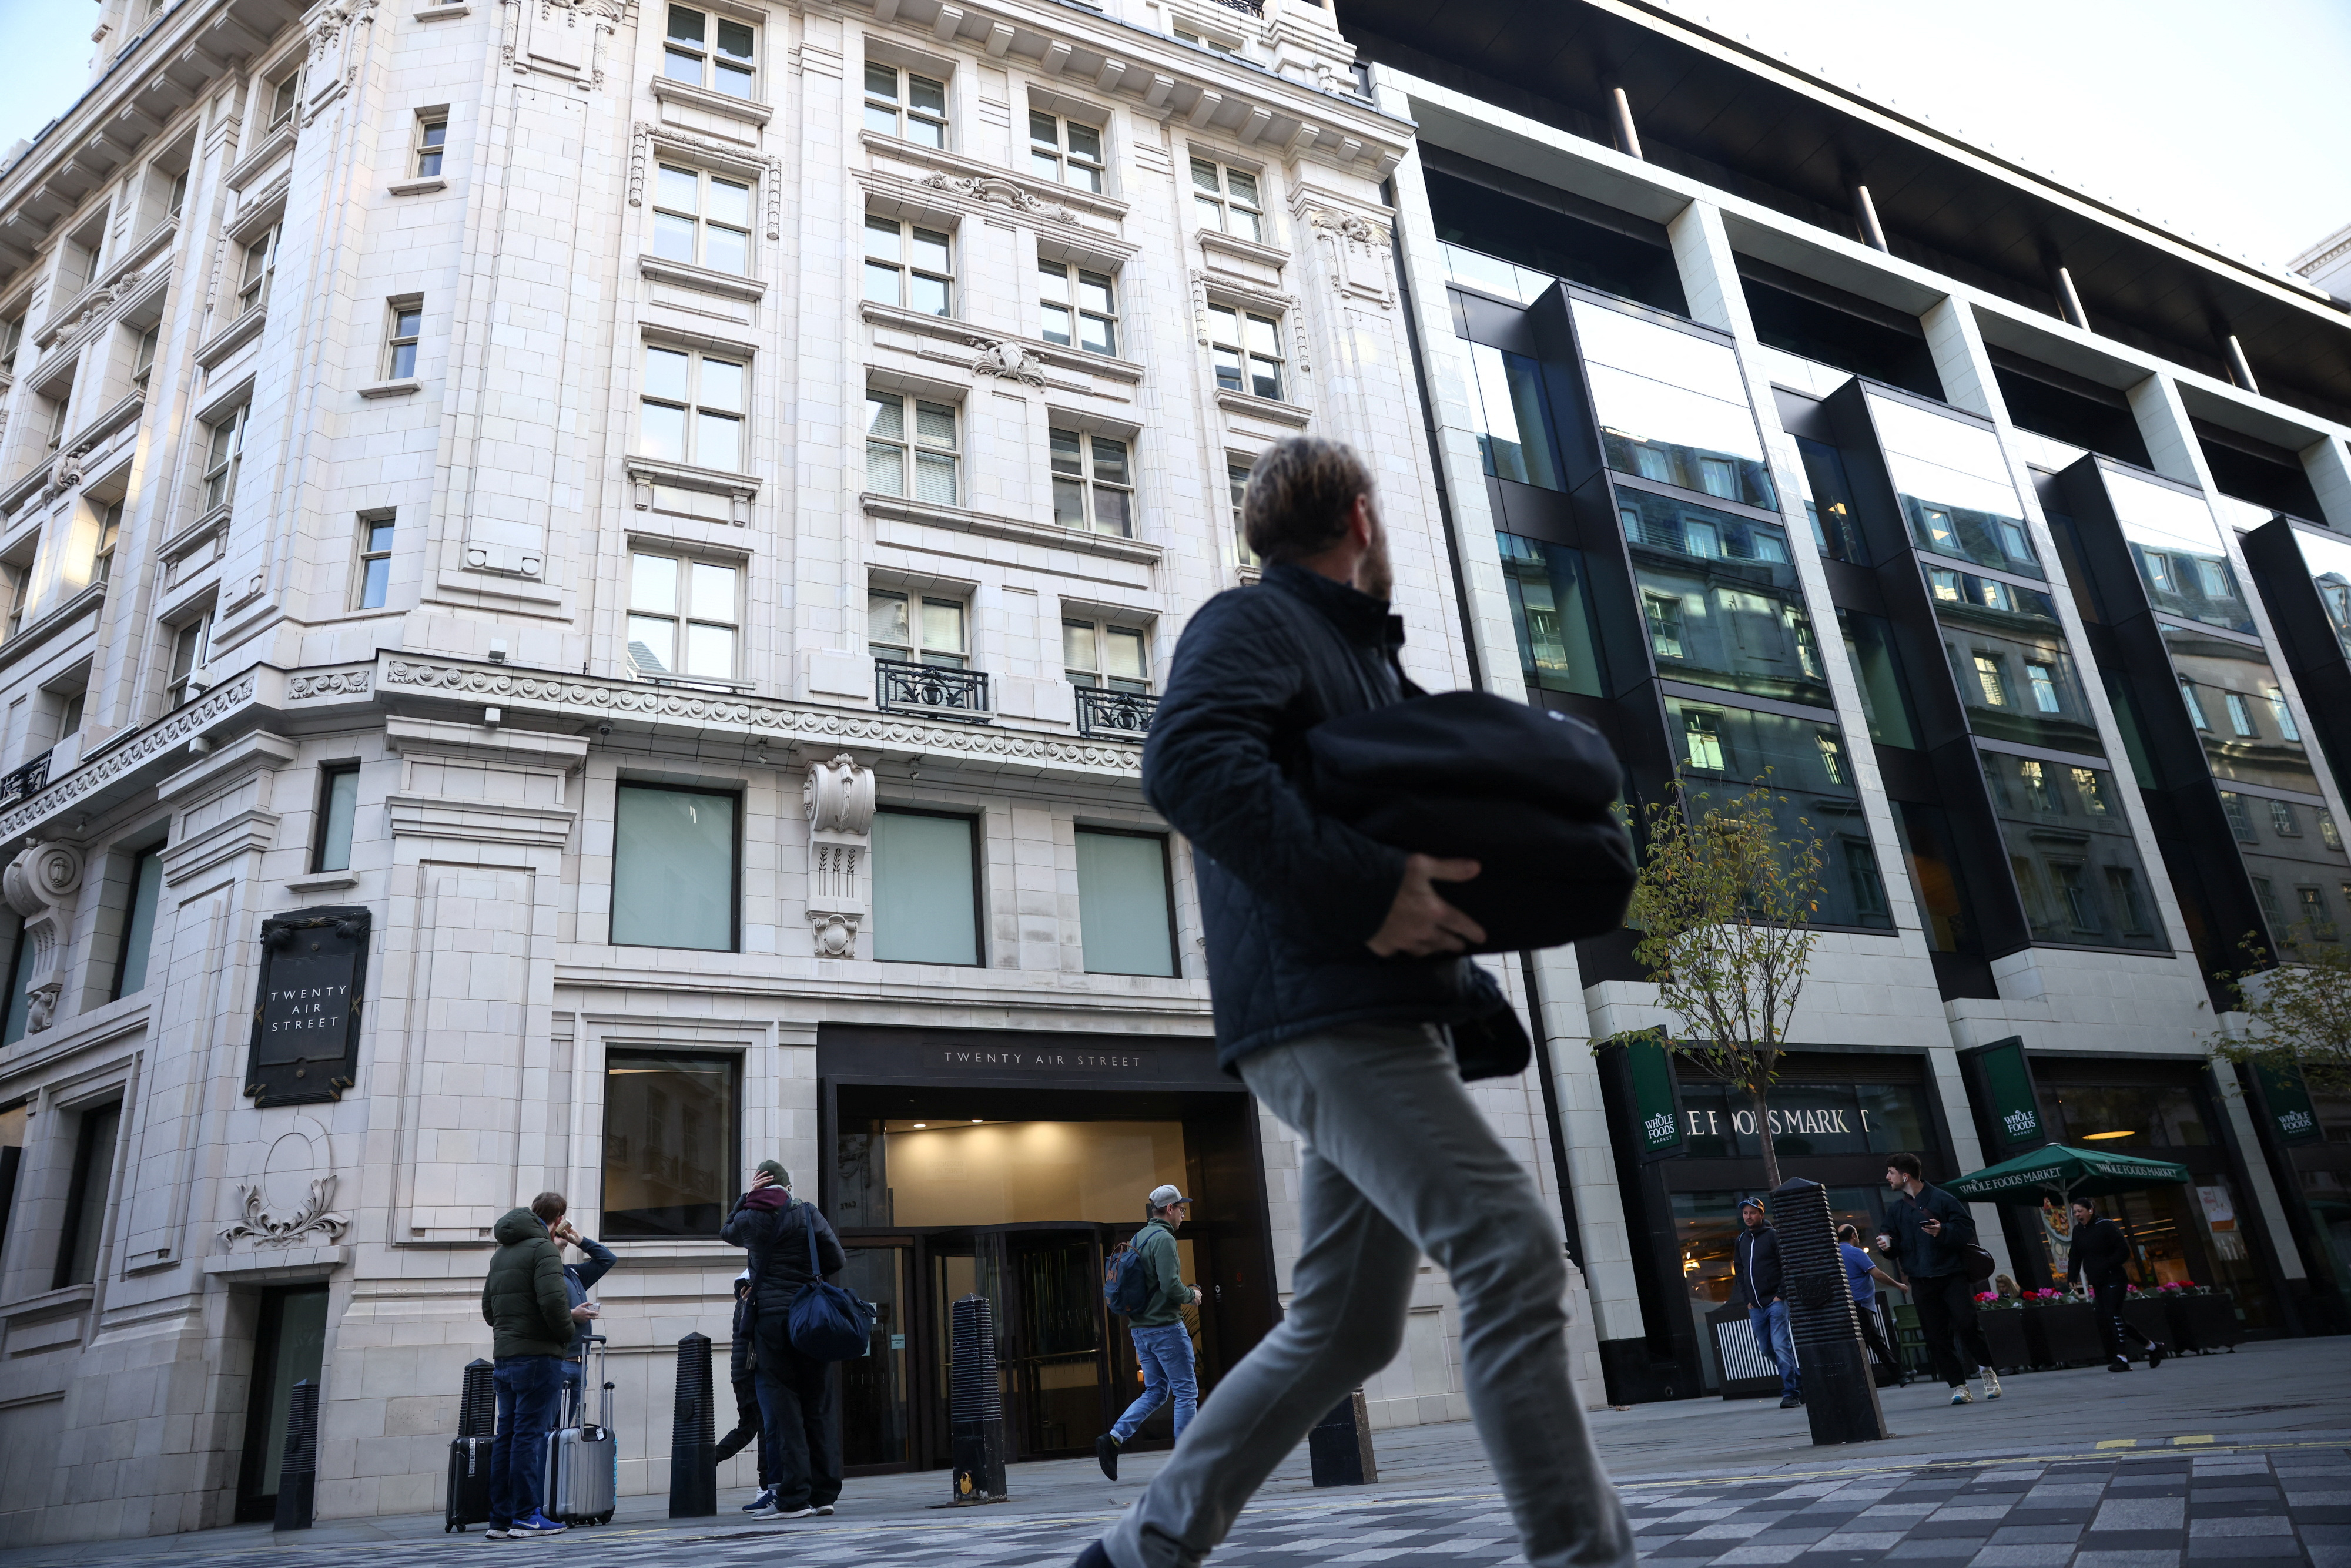 People are walking in front of the building that contains the headquarters of Twitter in the United Kingdom in the center of London, Great Britain